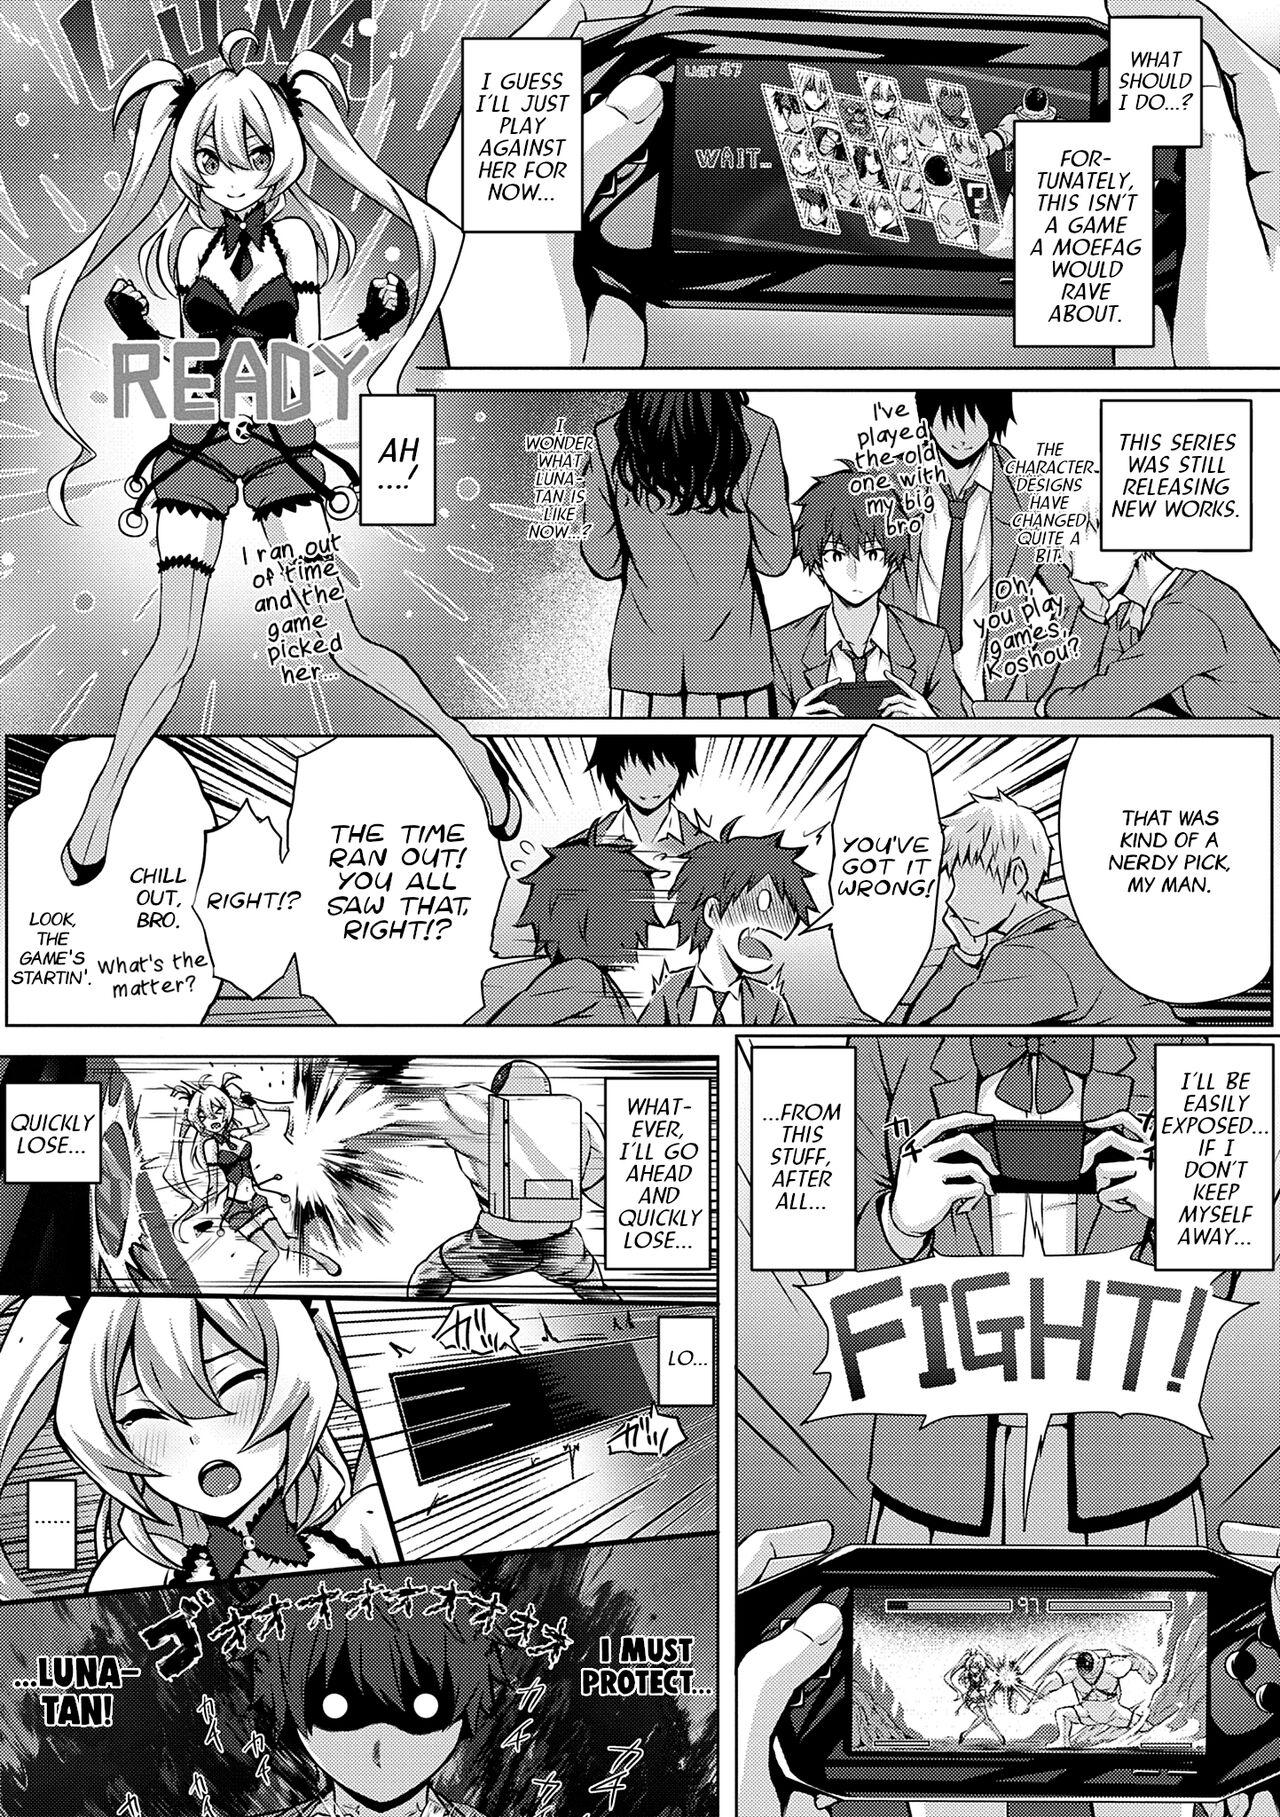 Big Penis Flag Kaishuu wa Totsuzen ni | The Puzzle Pieces Are Suddenly Coming Together Transex - Page 3